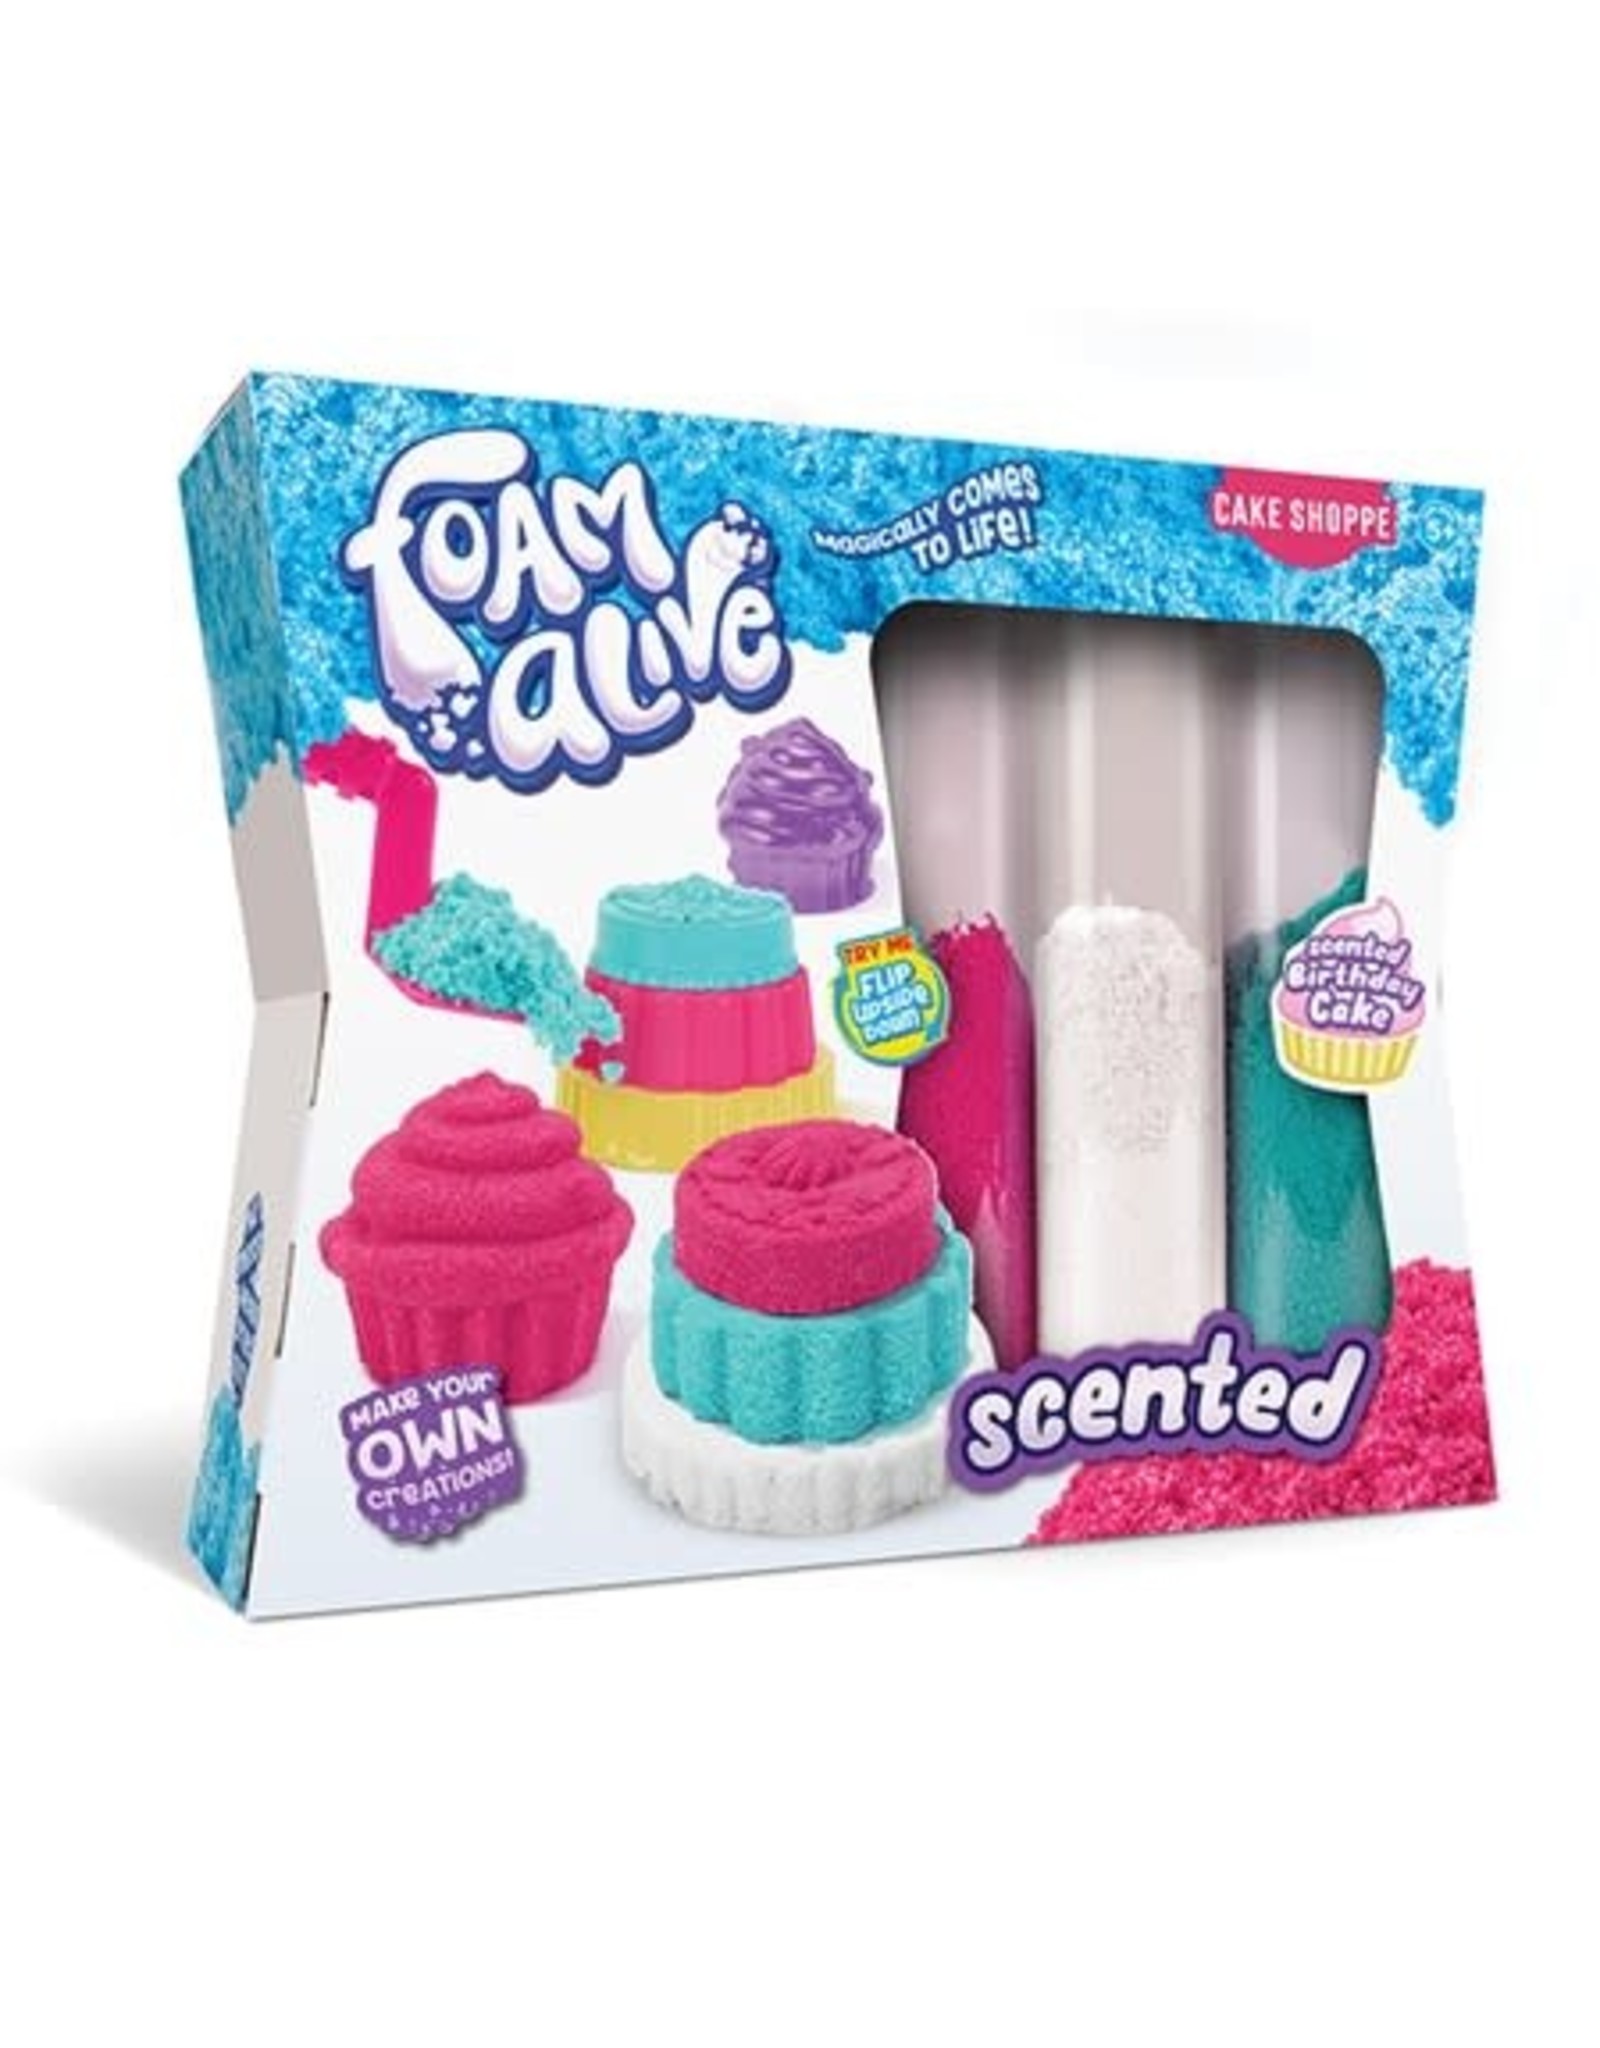 Play Visions Foam Alive Scented Bake Shop